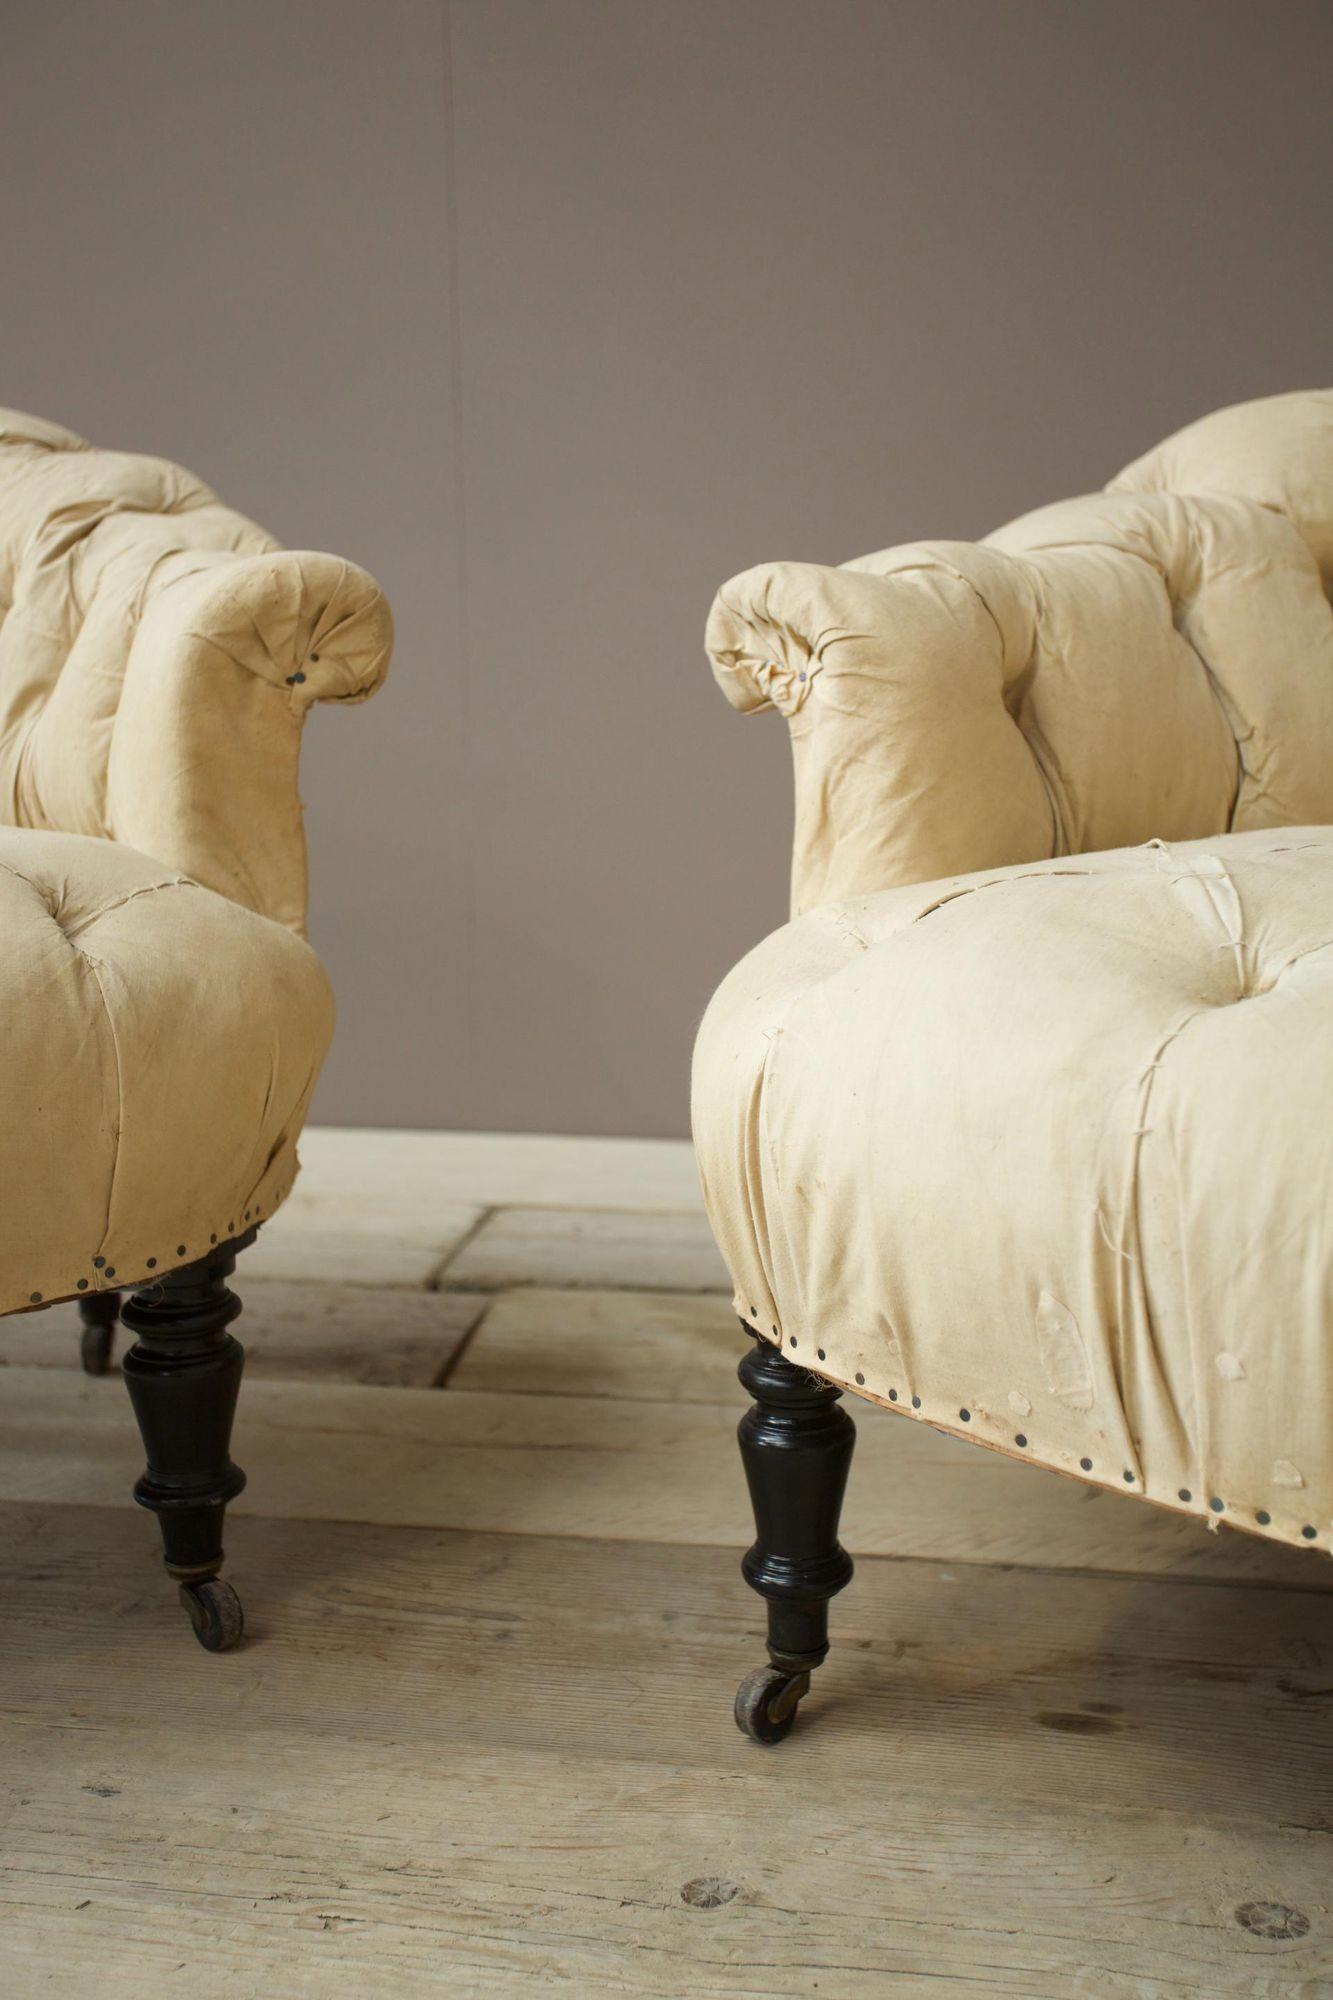 These are a very nice quality pair of French buttoned tub chairs. Attractive size with good seat height and lower than average back. The deep buttoned detail once upholstered will give these a very sumptuous appearance. Comfy and well designed. 
